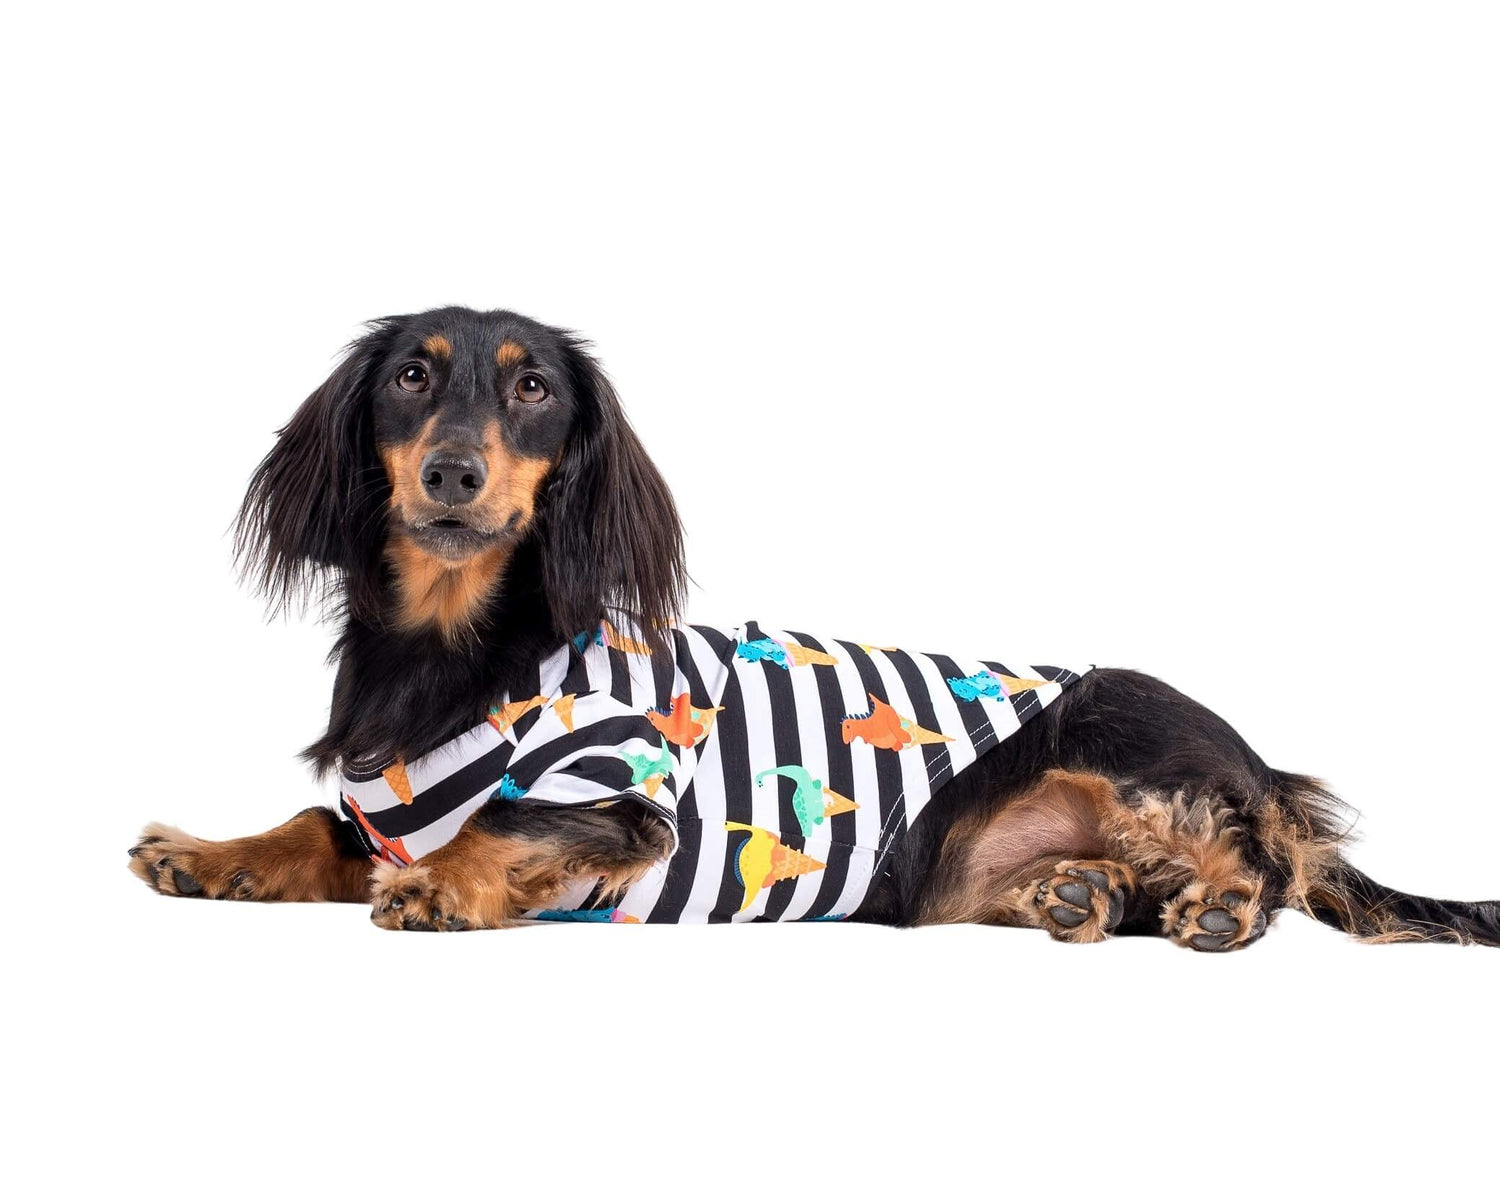 Dachshund laying down wearing Vibrant Hounds Dino-mite shirt for dogs. It is black and white horizontal stripes with Dinosaurs and ice creams printed on them.